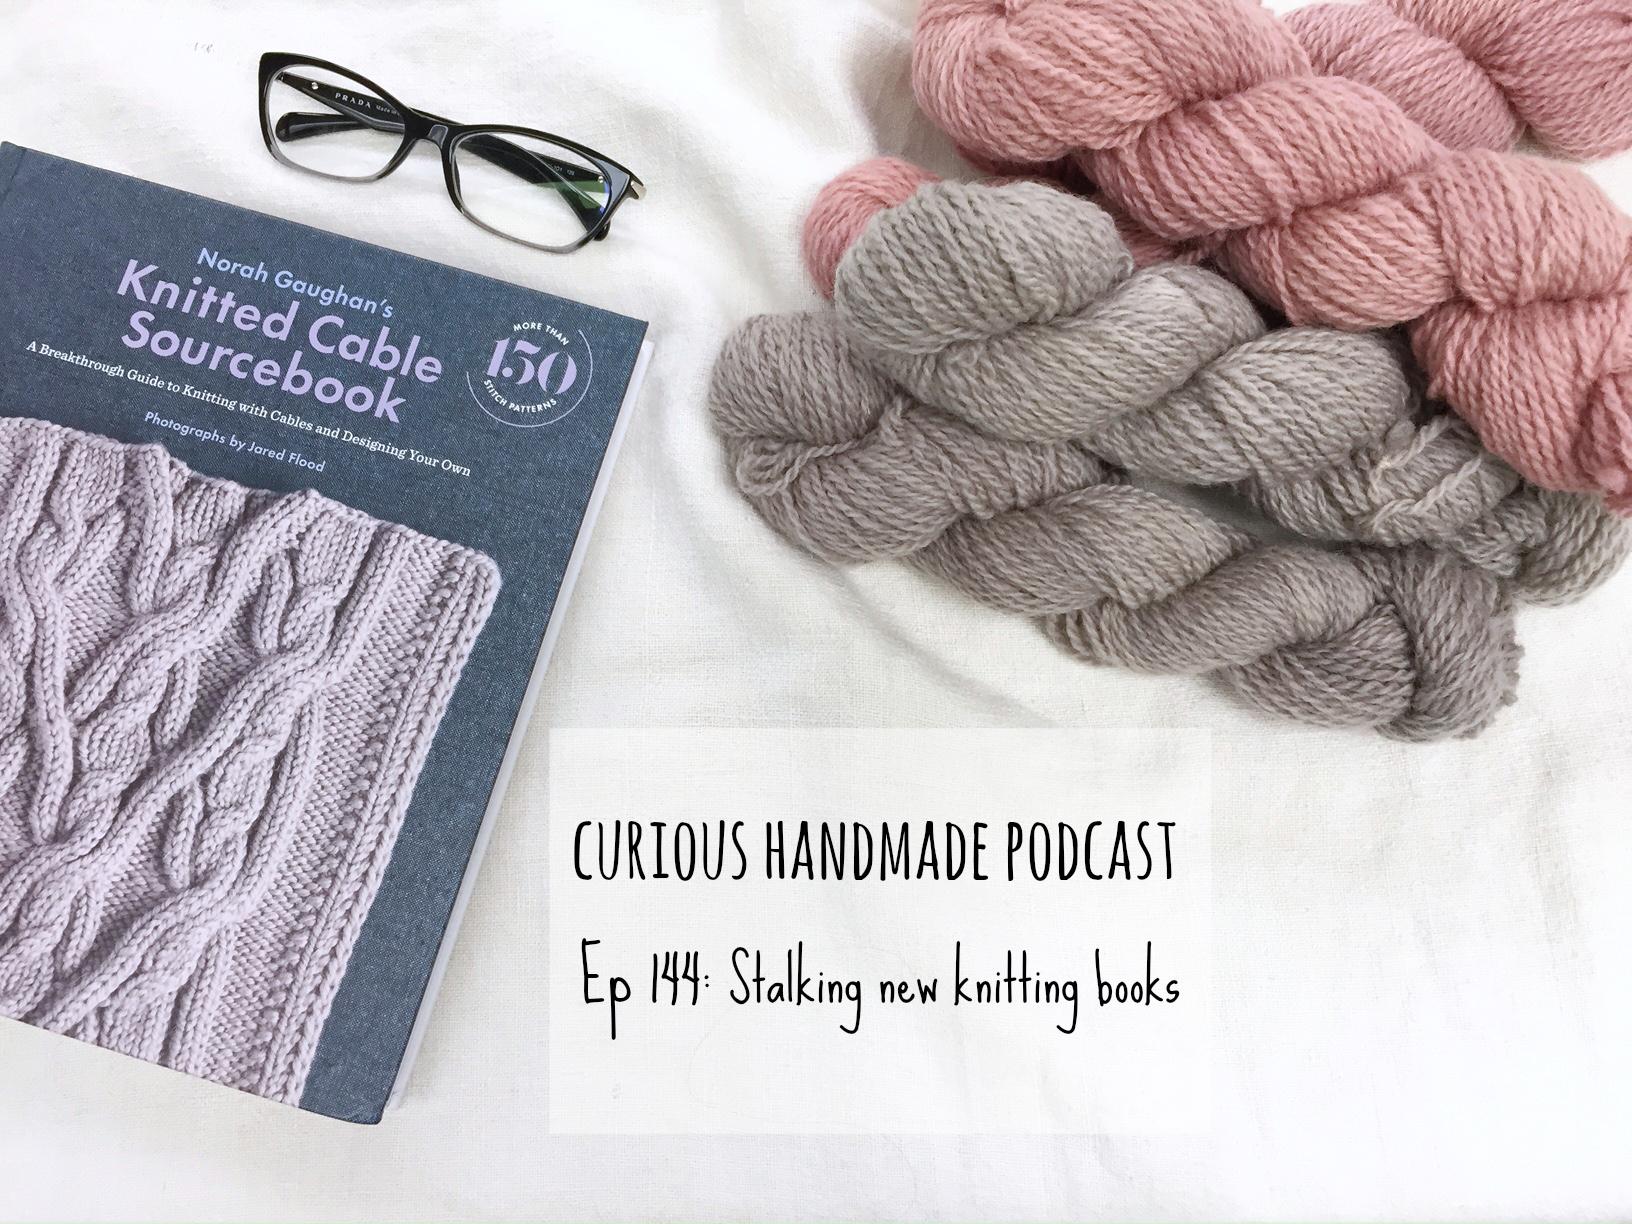 CH 144: Stalking new knitting books - Curious Handmade Knitting Patterns  and Knitting Podcast